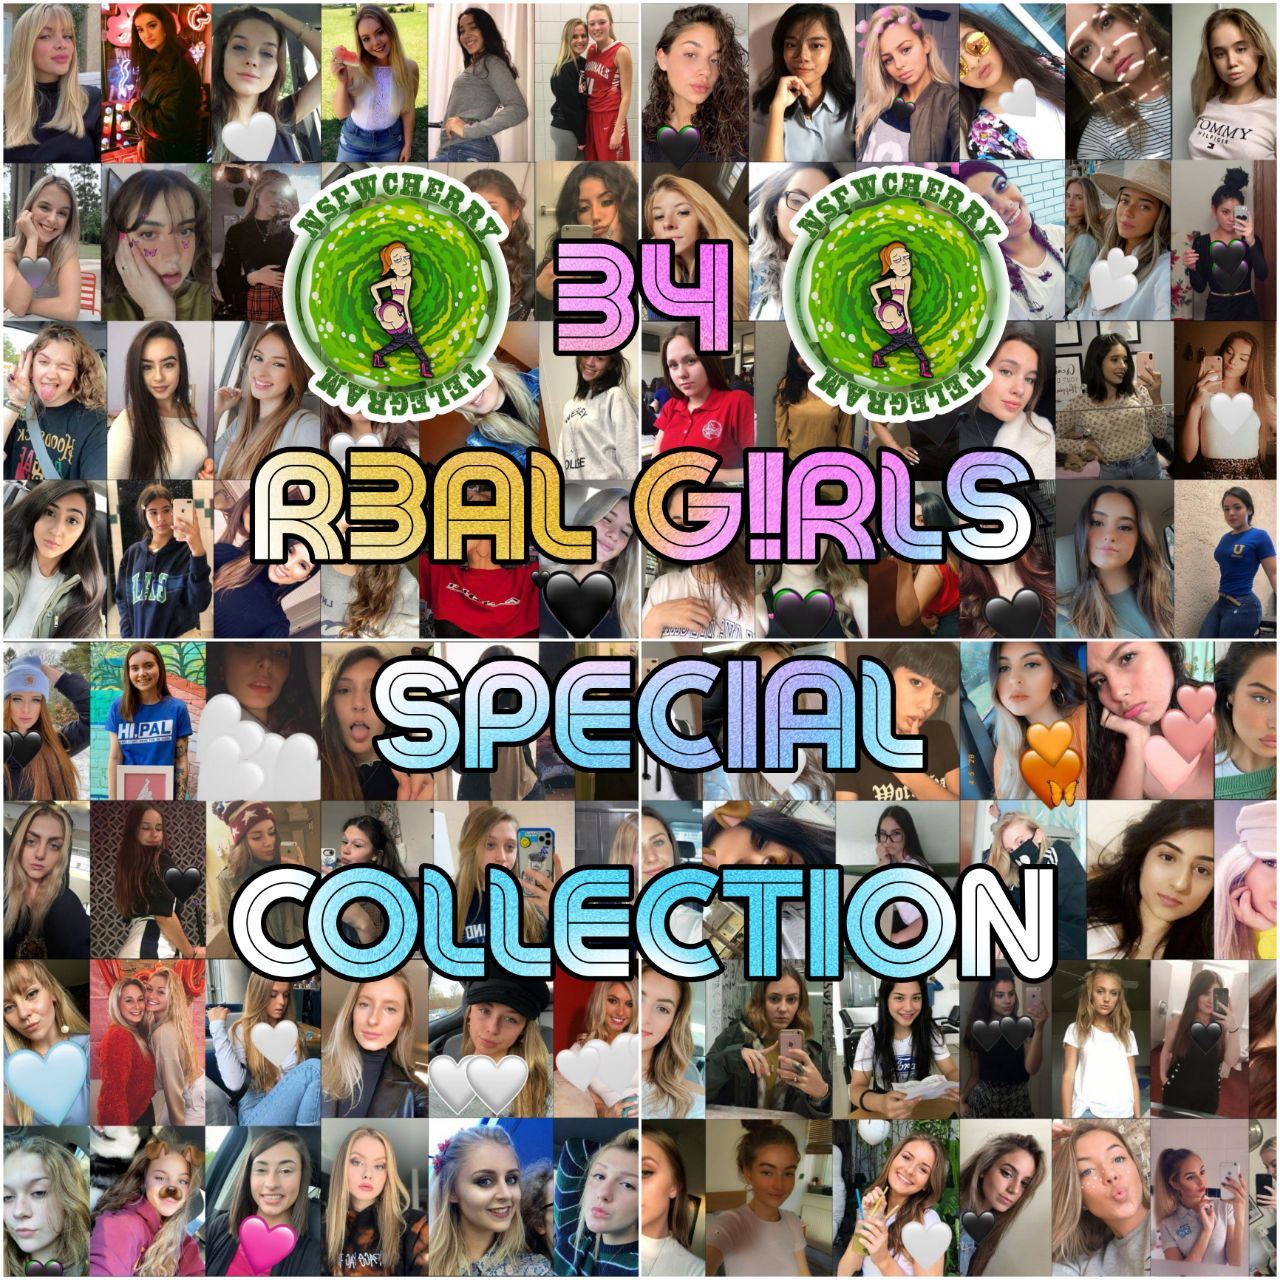 34 REAL G!RLS SPECIAL COLLECTION